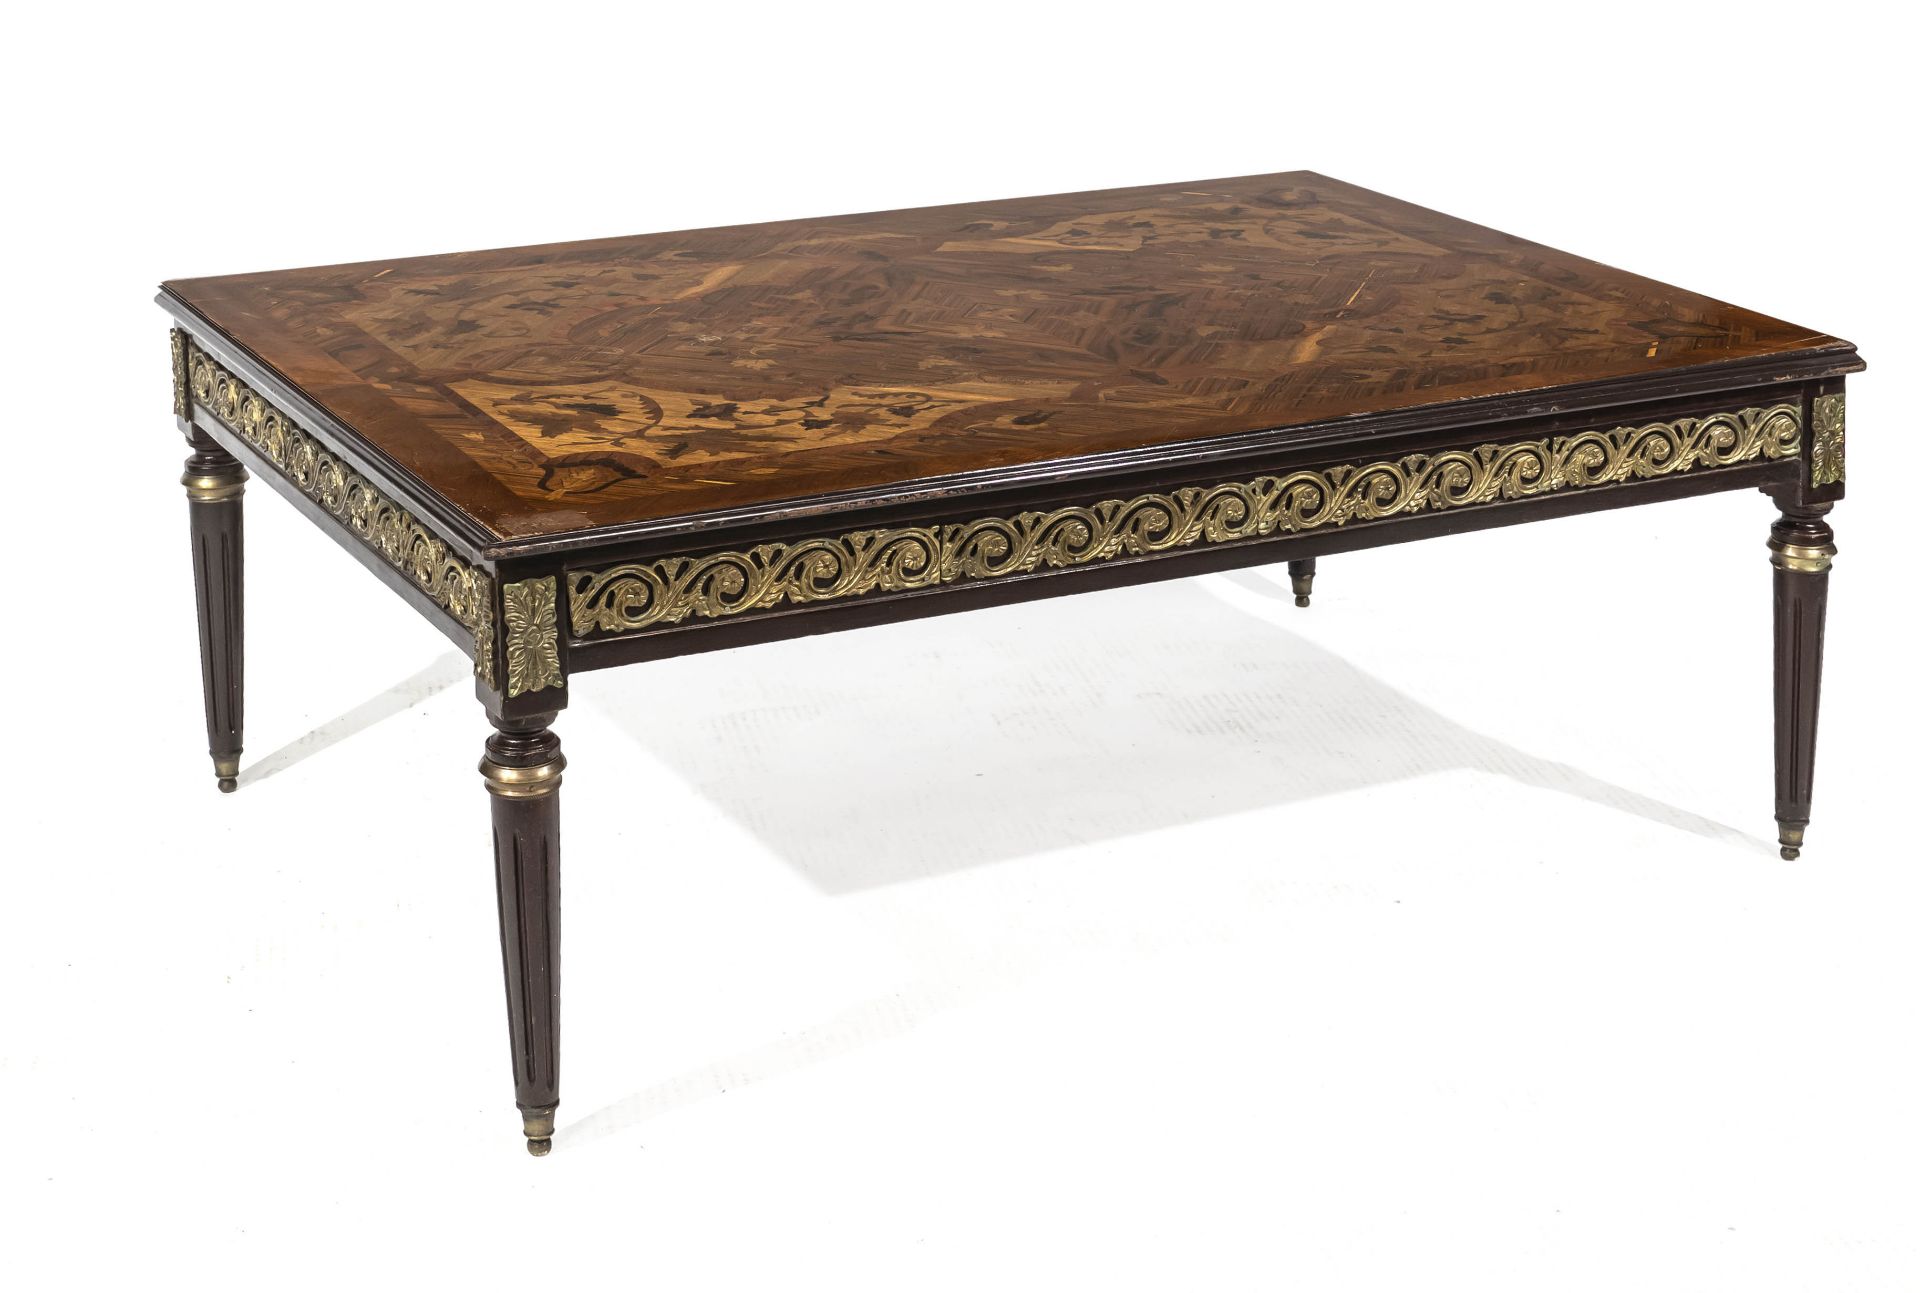 Coffee table in Louis-Seize style, late 20th century, mahogany veneered and inlaid with other